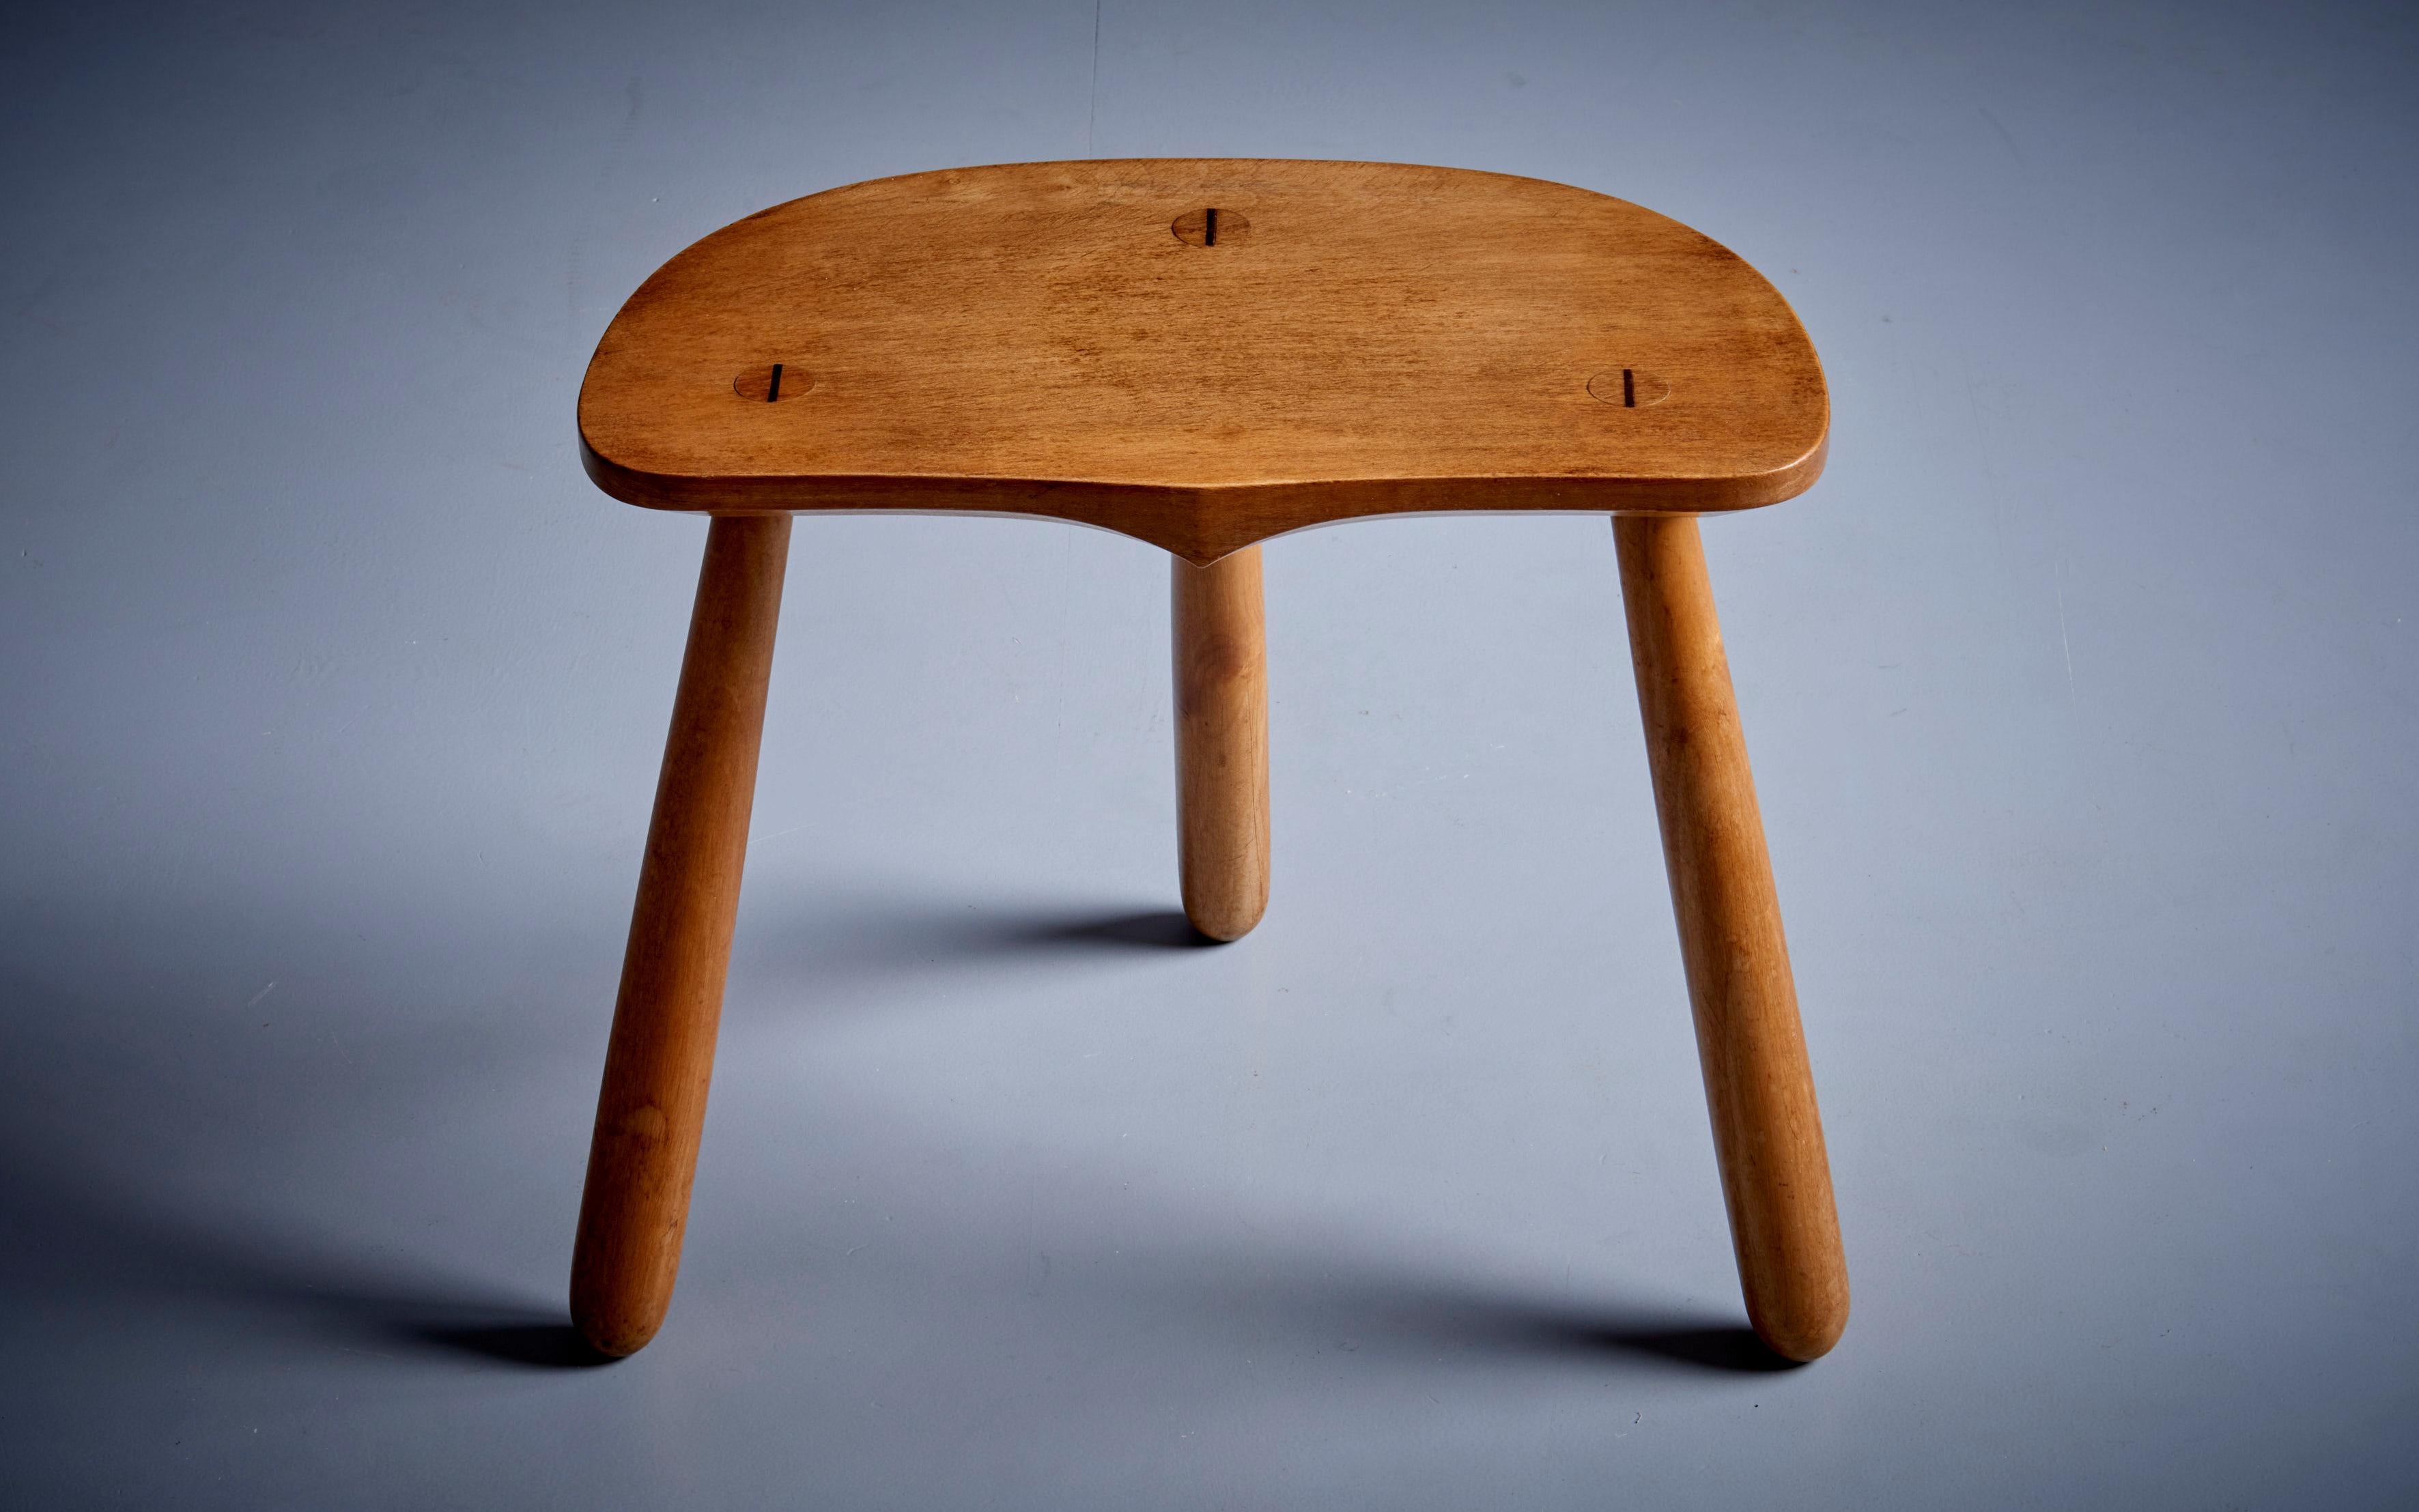 Another rare Alan Peters stool in maple from our collection. Please also have a look at the Alan Peters Coffee Table we also have in stock.

Alan George Peters OBE (17 January 1933 – 11 October 2009) was a British furniture designer maker and one